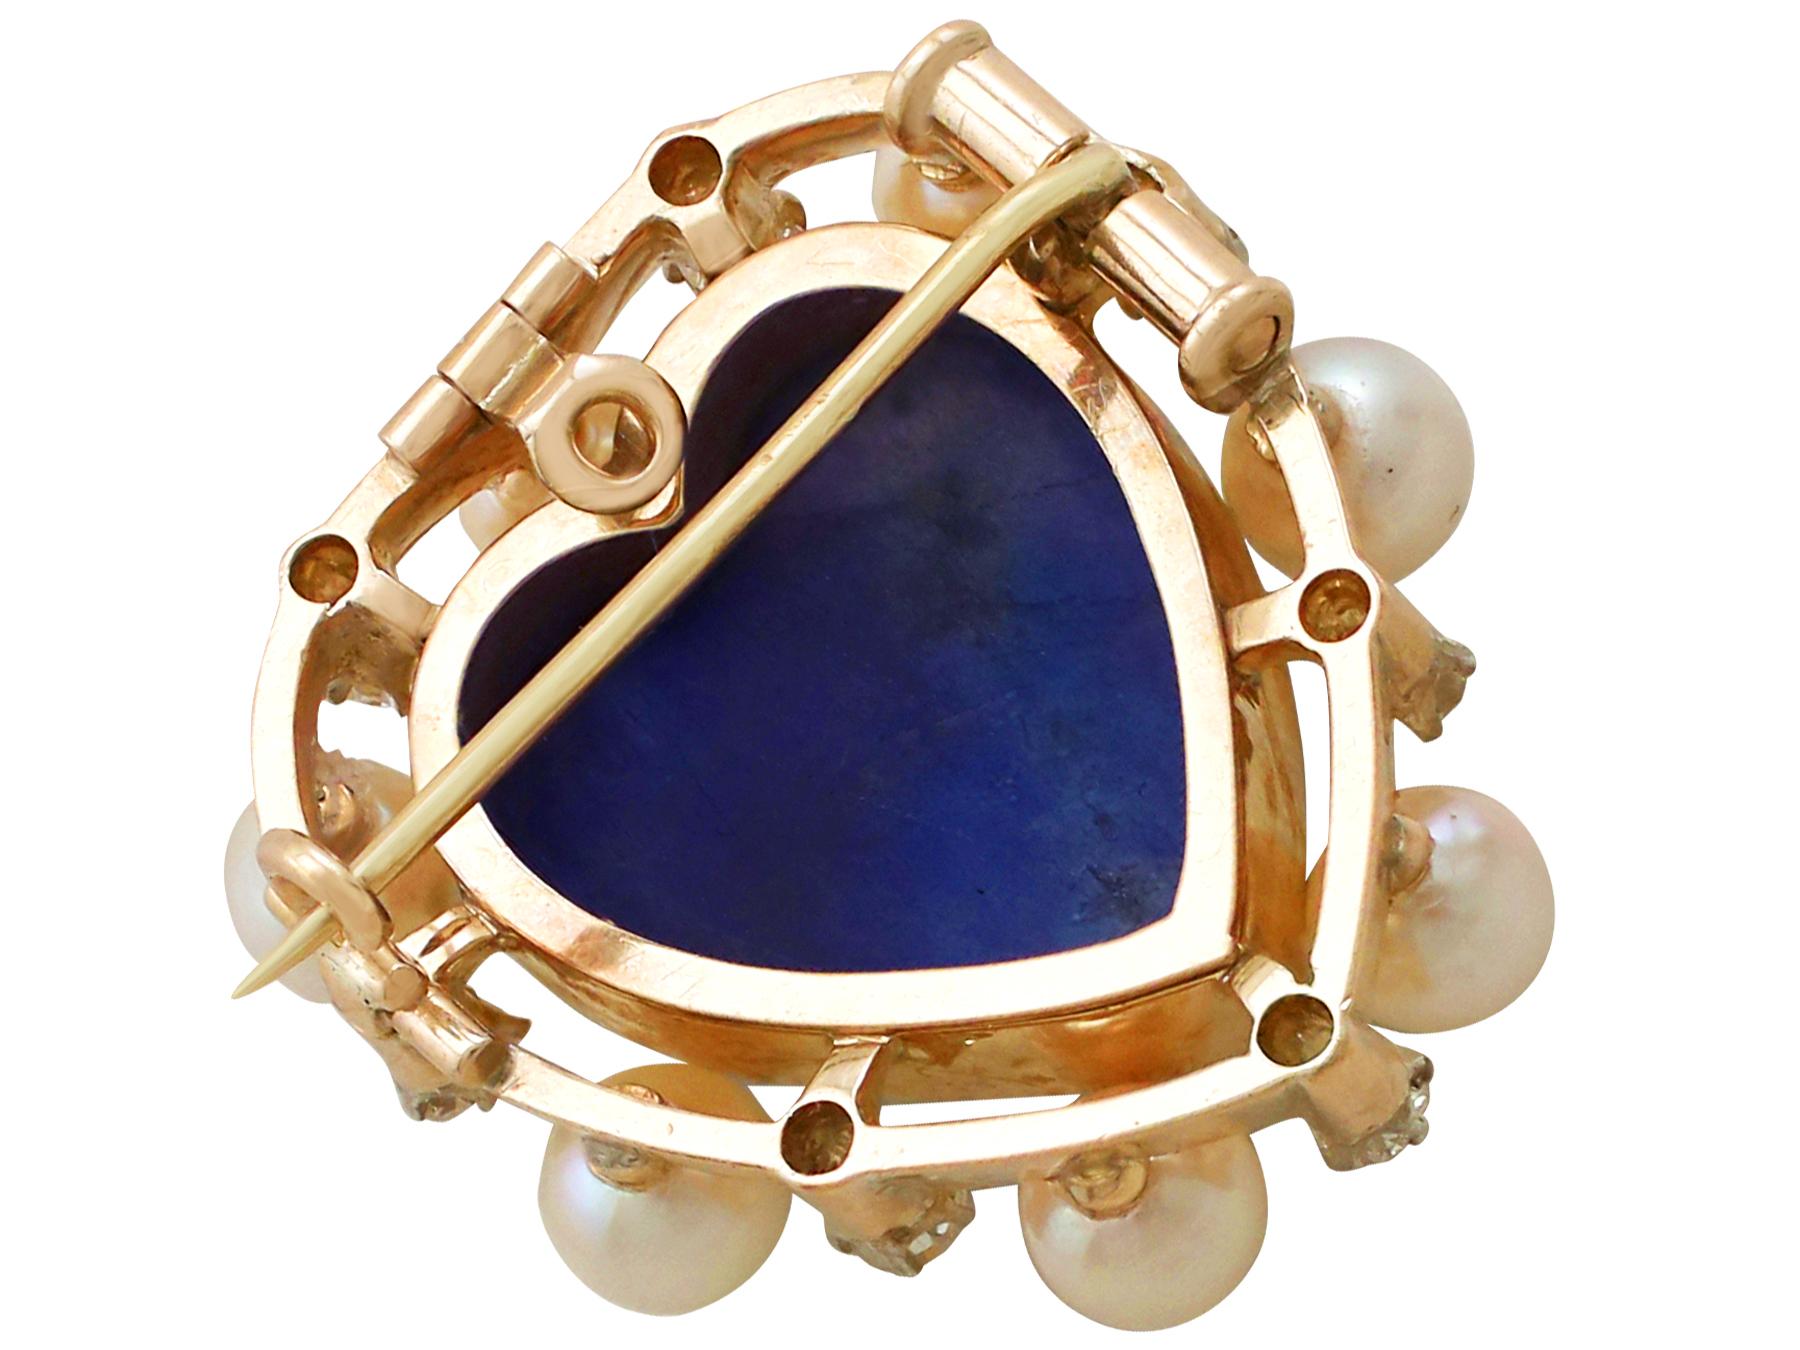 Antique 3.98Ct Cabochon Cut Labradorite and Seed Pearl Diamond and Gold Brooch In Excellent Condition For Sale In Jesmond, Newcastle Upon Tyne